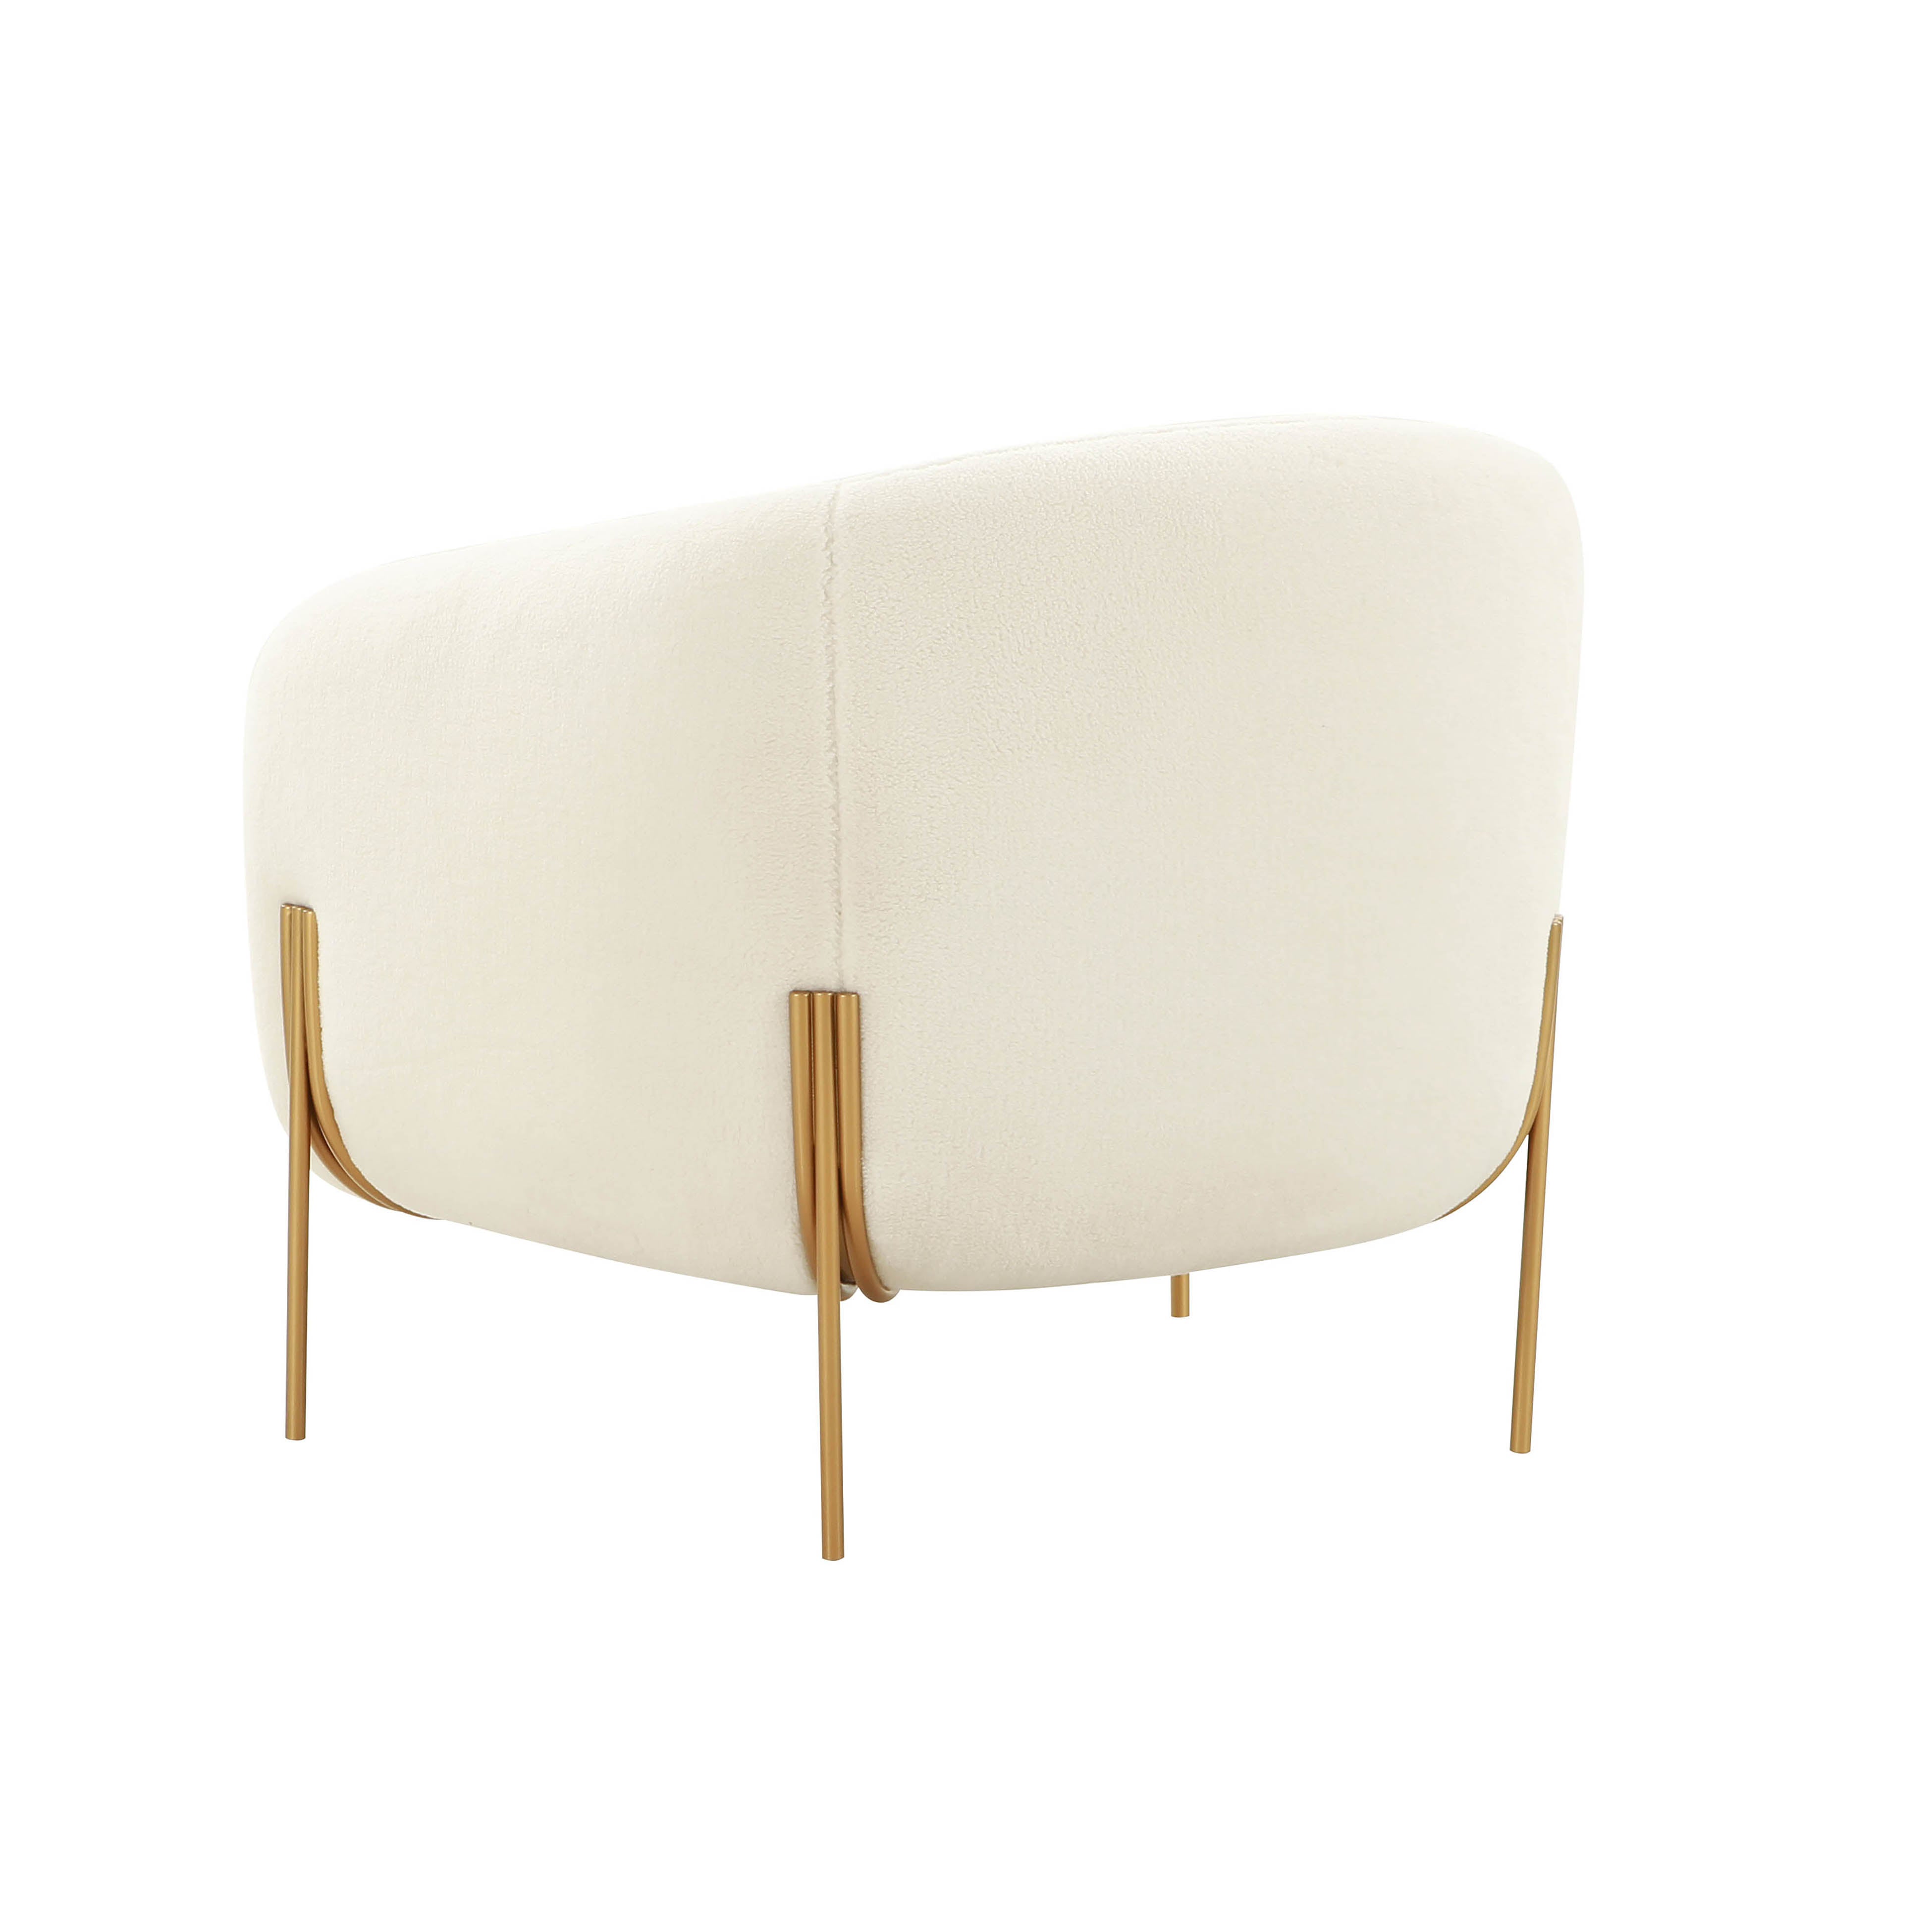 KANDRA CREAM SHEARLING ACCENT CHAIR